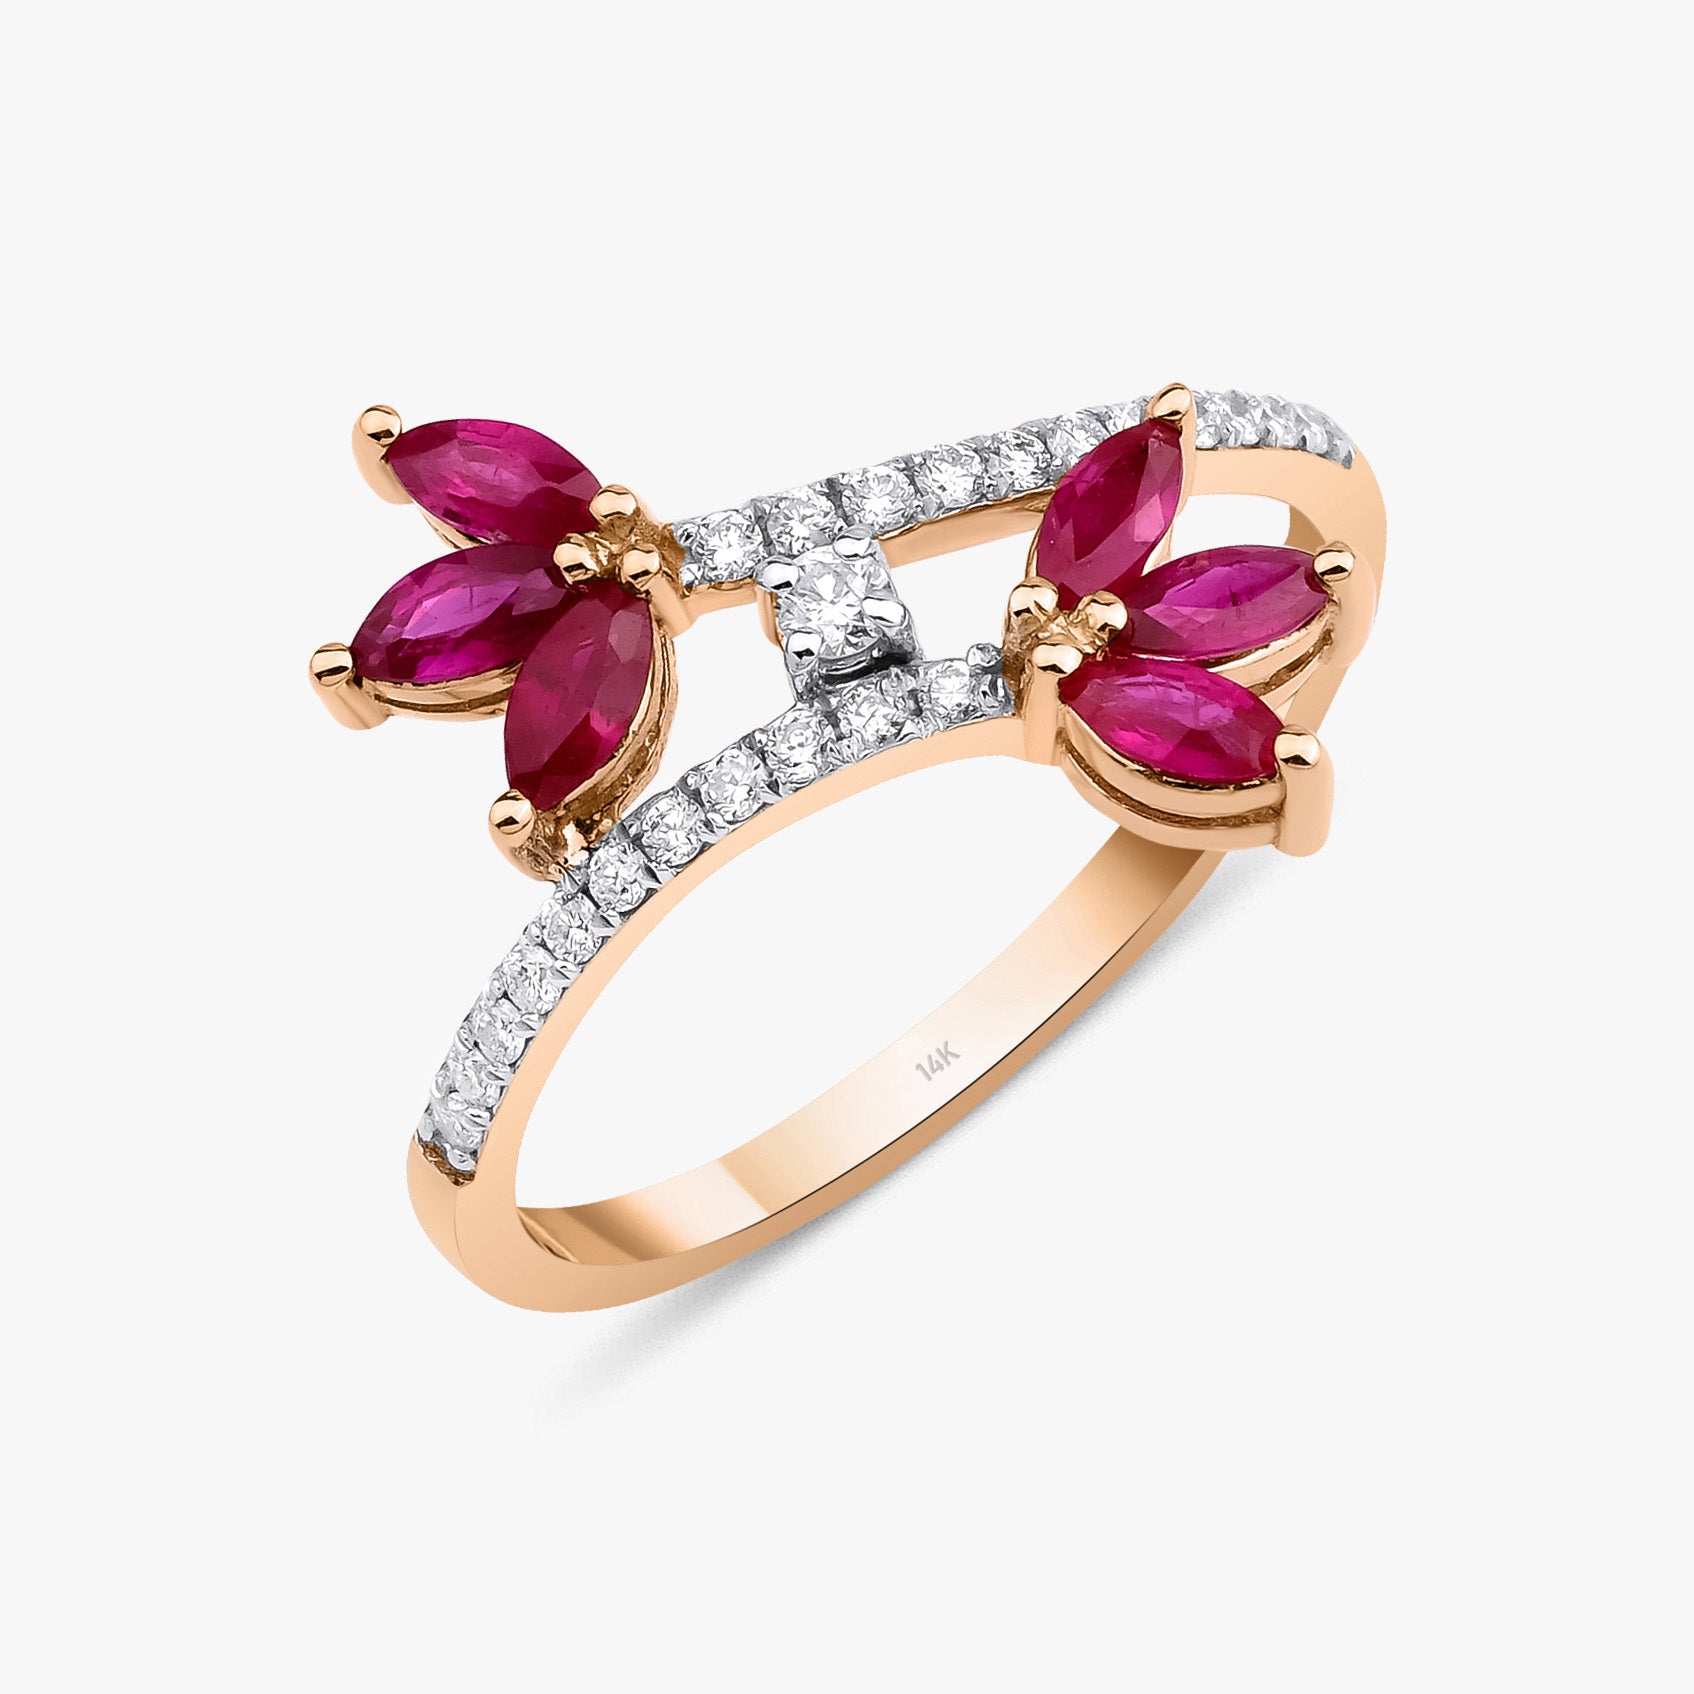 Marquise Cut Ruby and Diamond Flower Ring in 14K Gold